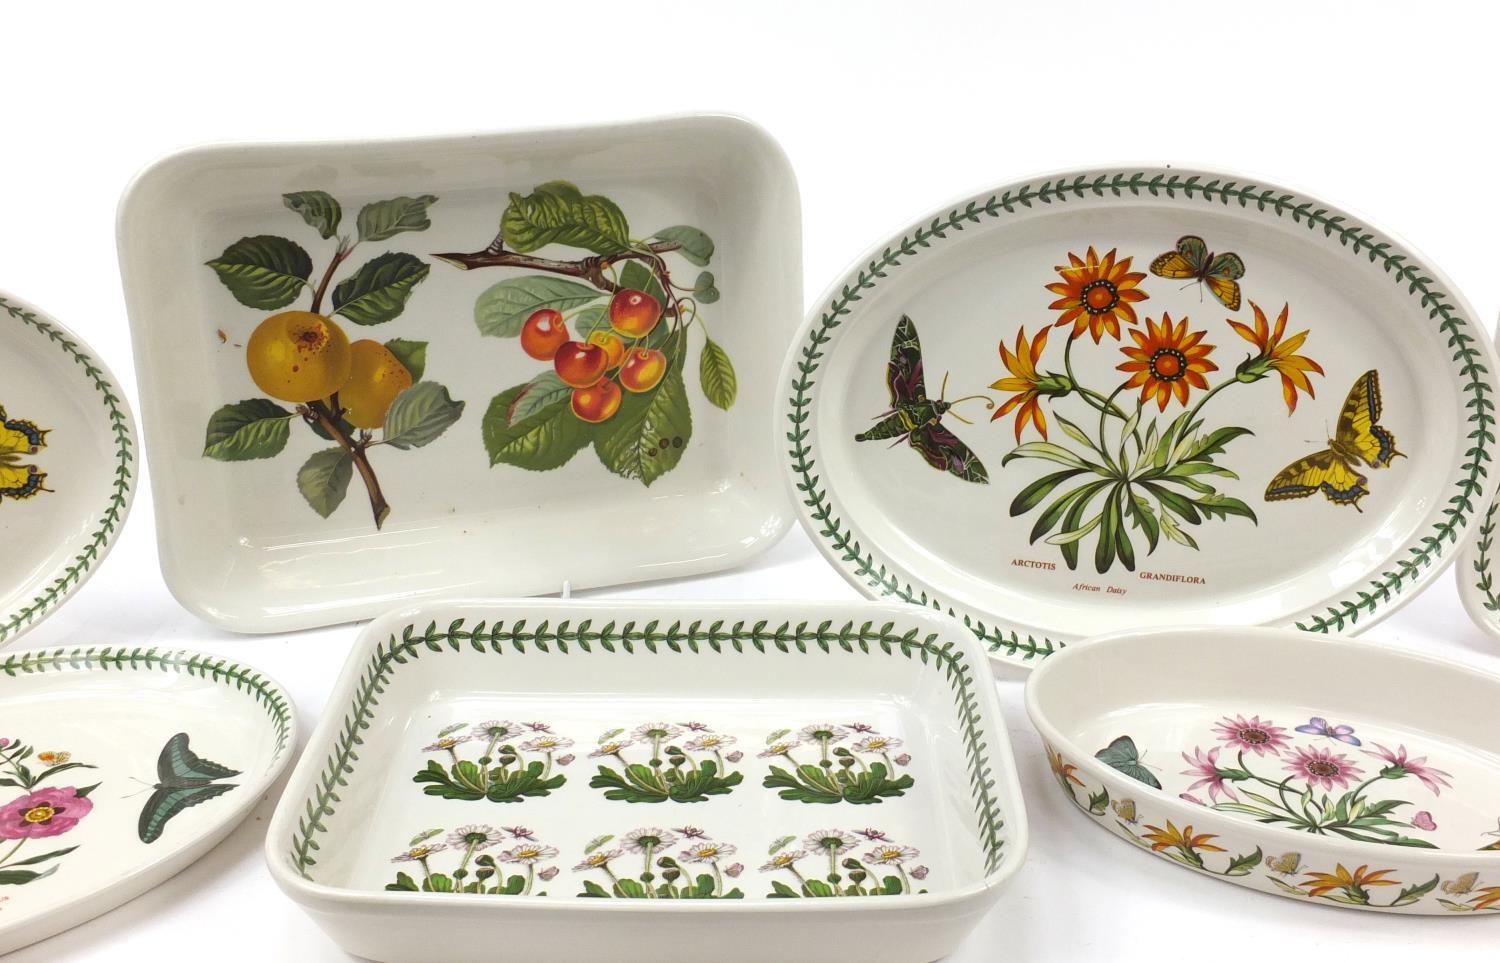 Portmeirion Botanic Garden dinnerware including meat plates and ramekins, the largest 35cm in length - Image 5 of 19